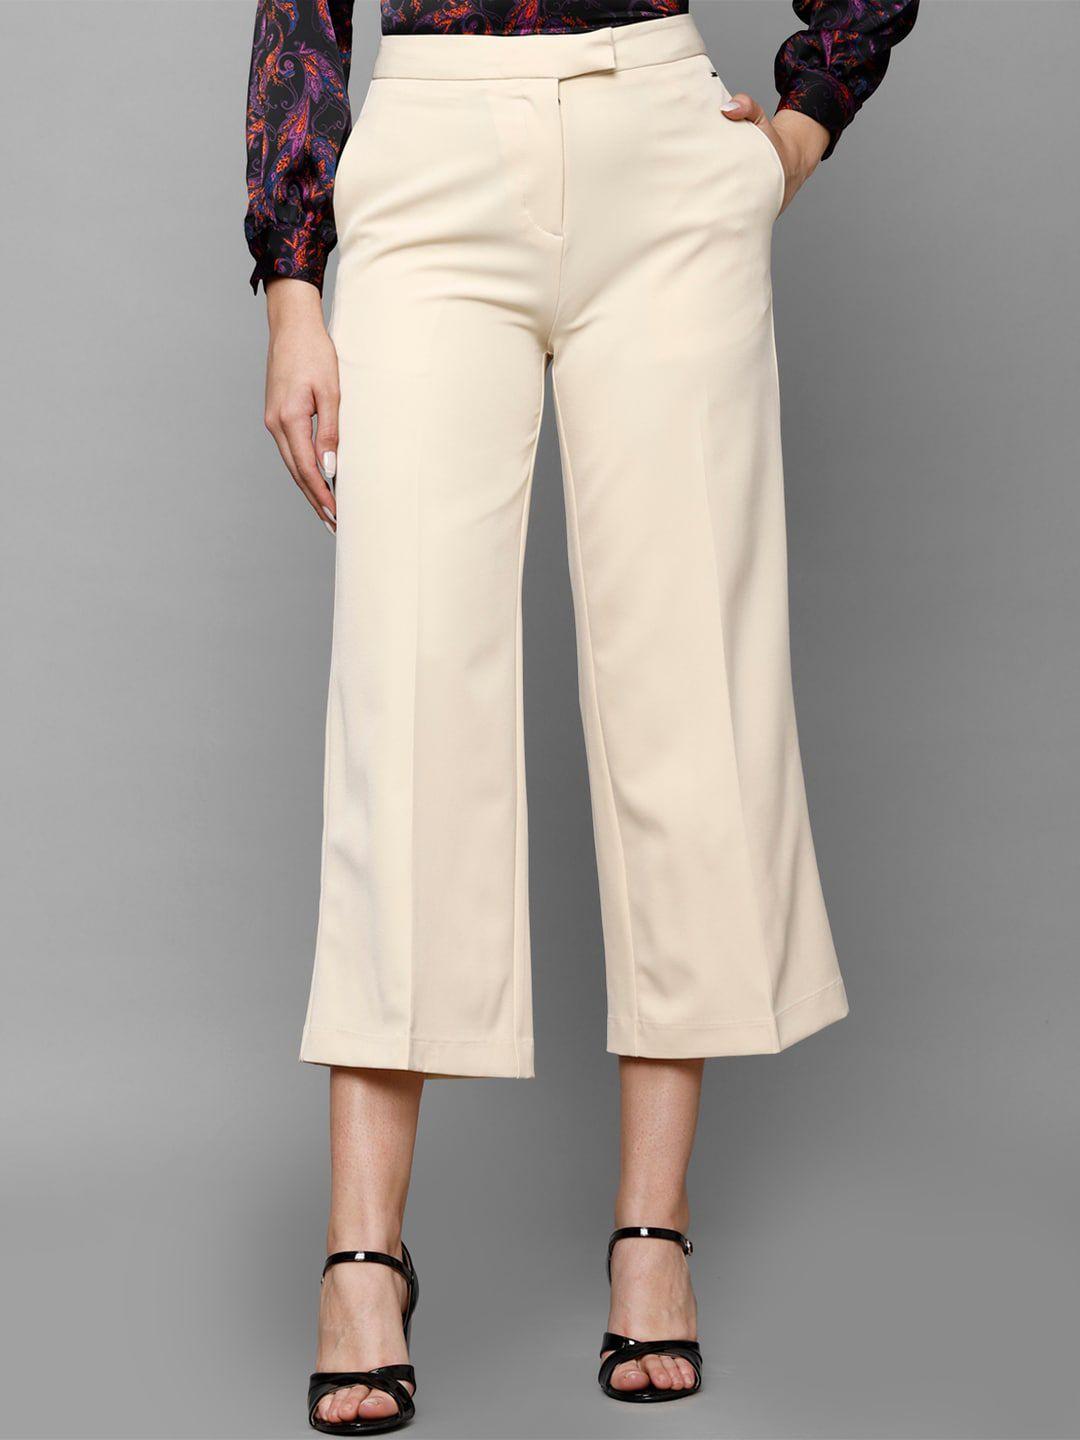 allen-solly-woman-culottes-trousers